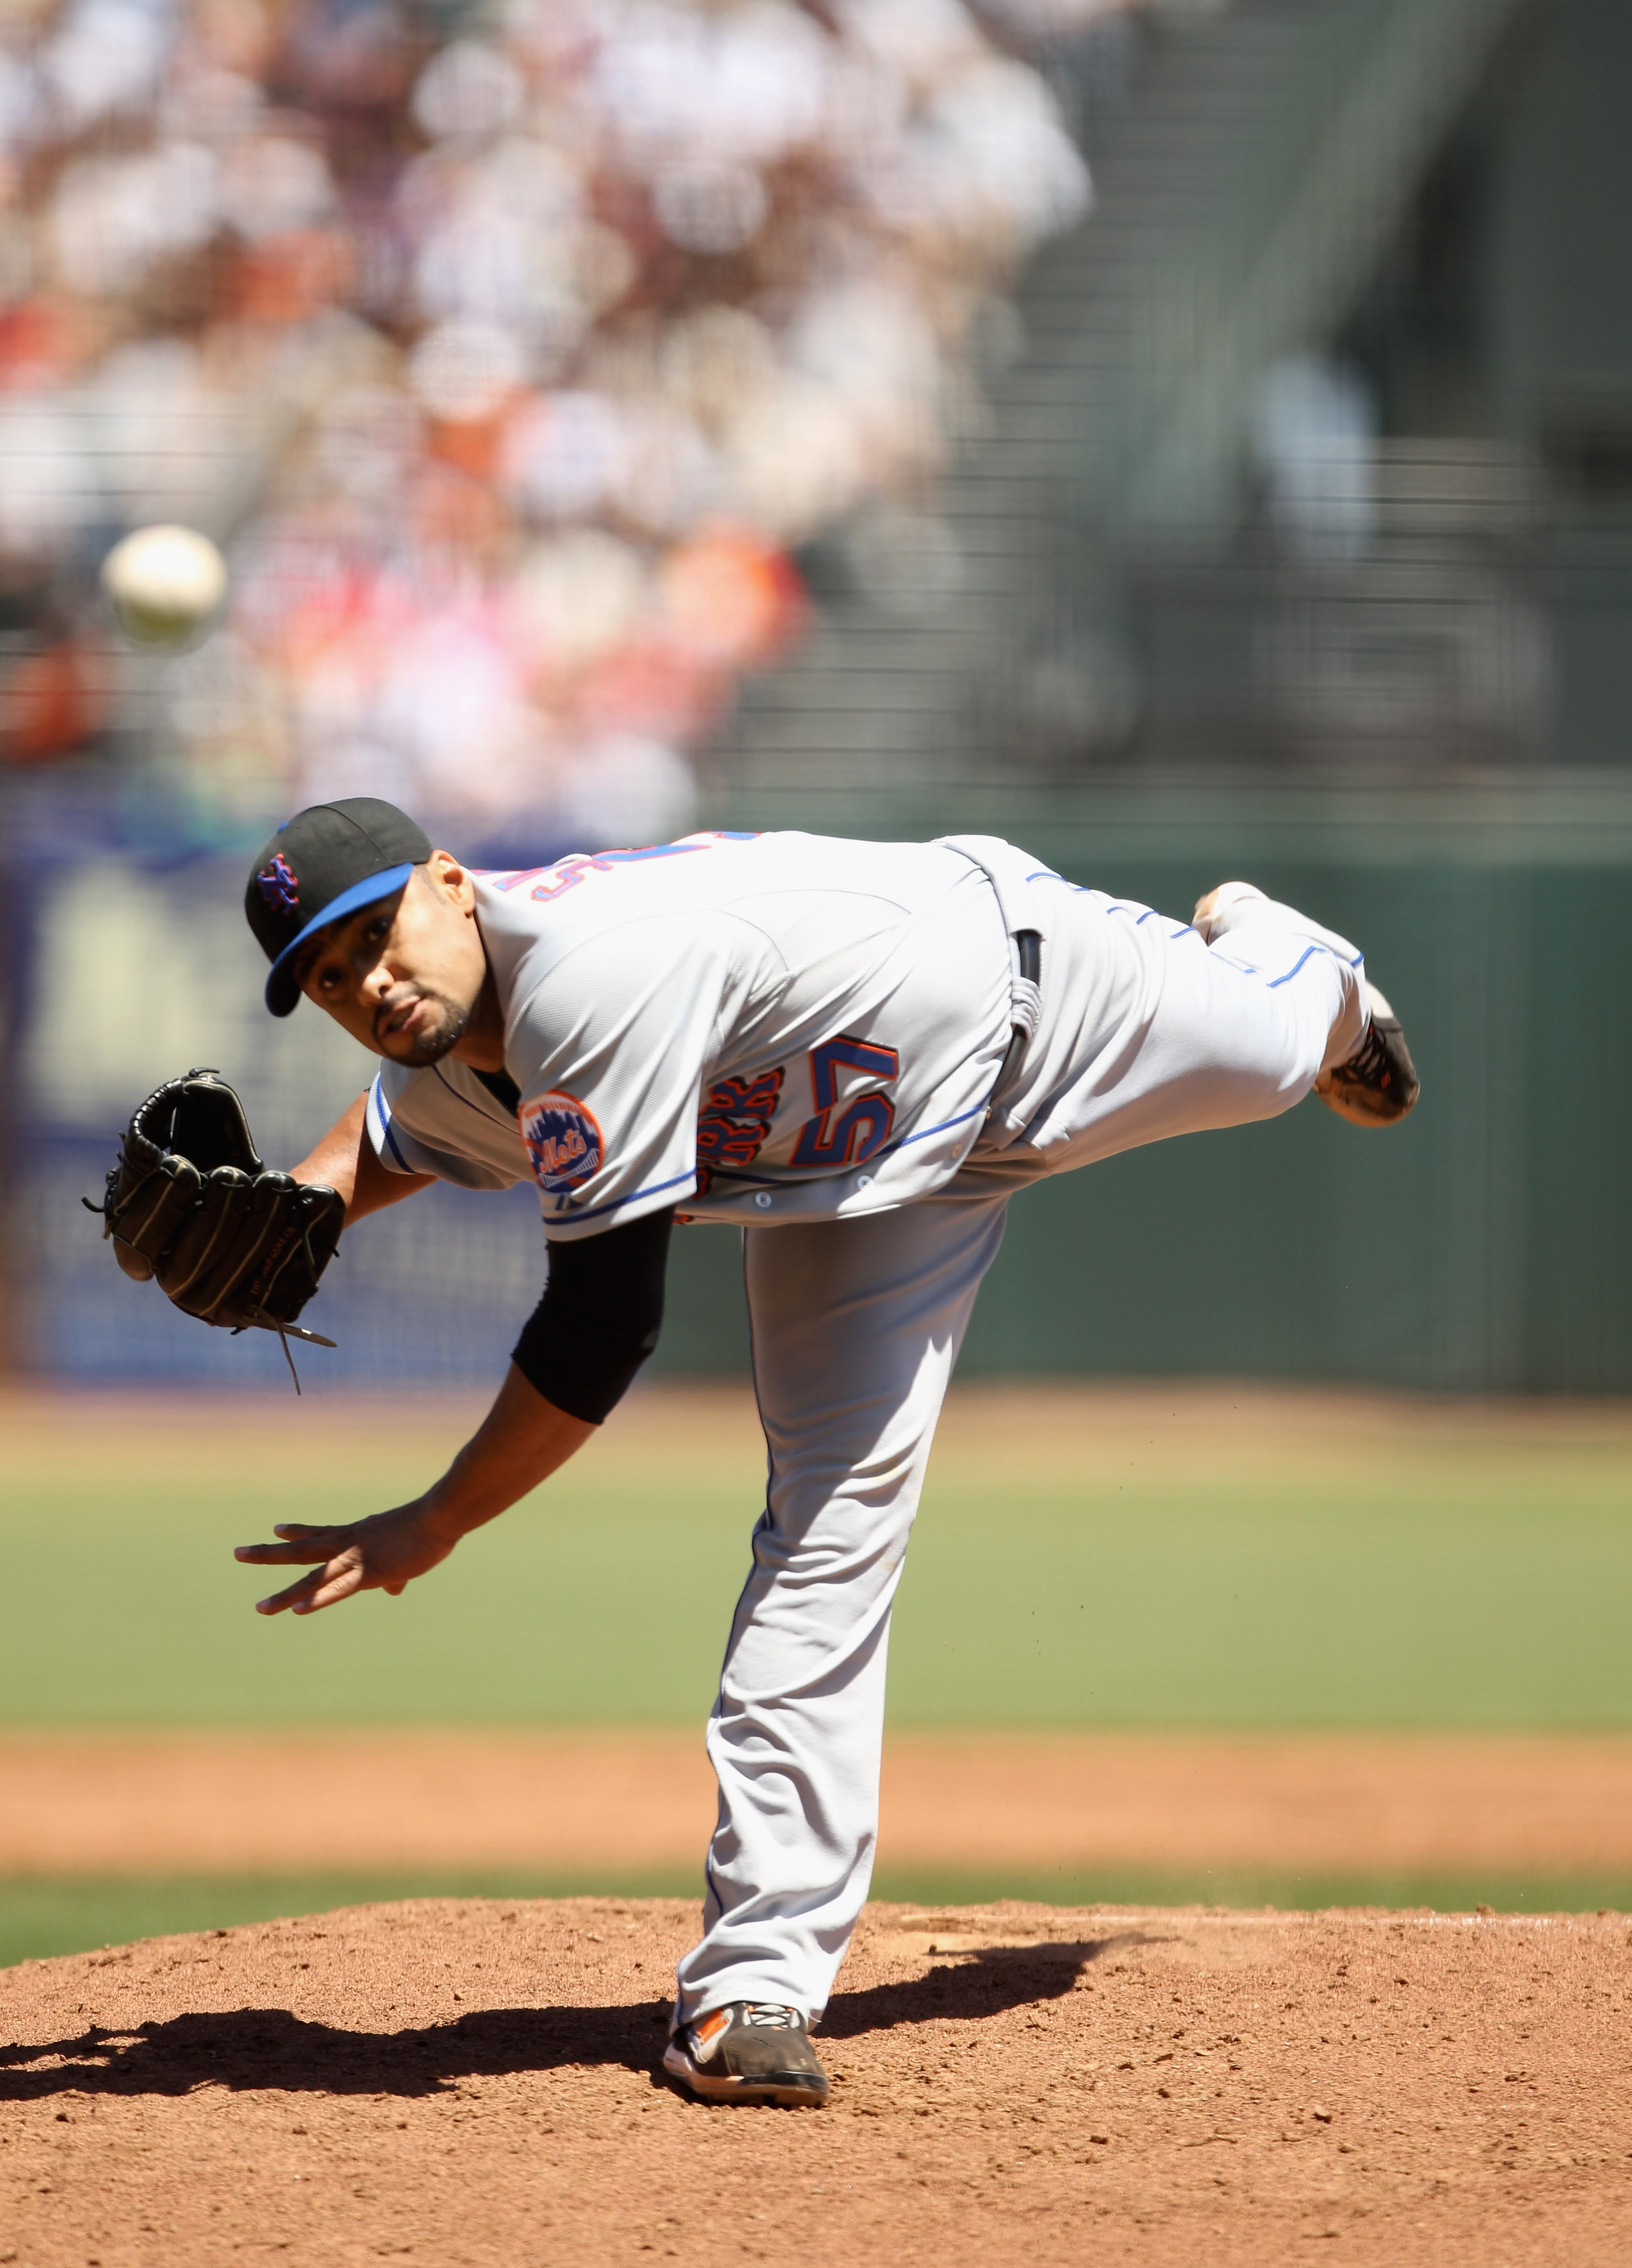 SAN FRANCISCO - JULY 18:  Johan Santana #57 of the New York Mets pitches against the San Francisco Giants at AT&T Park on July 18, 2010 in San Francisco, California.  (Photo by Ezra Shaw/Getty Images)